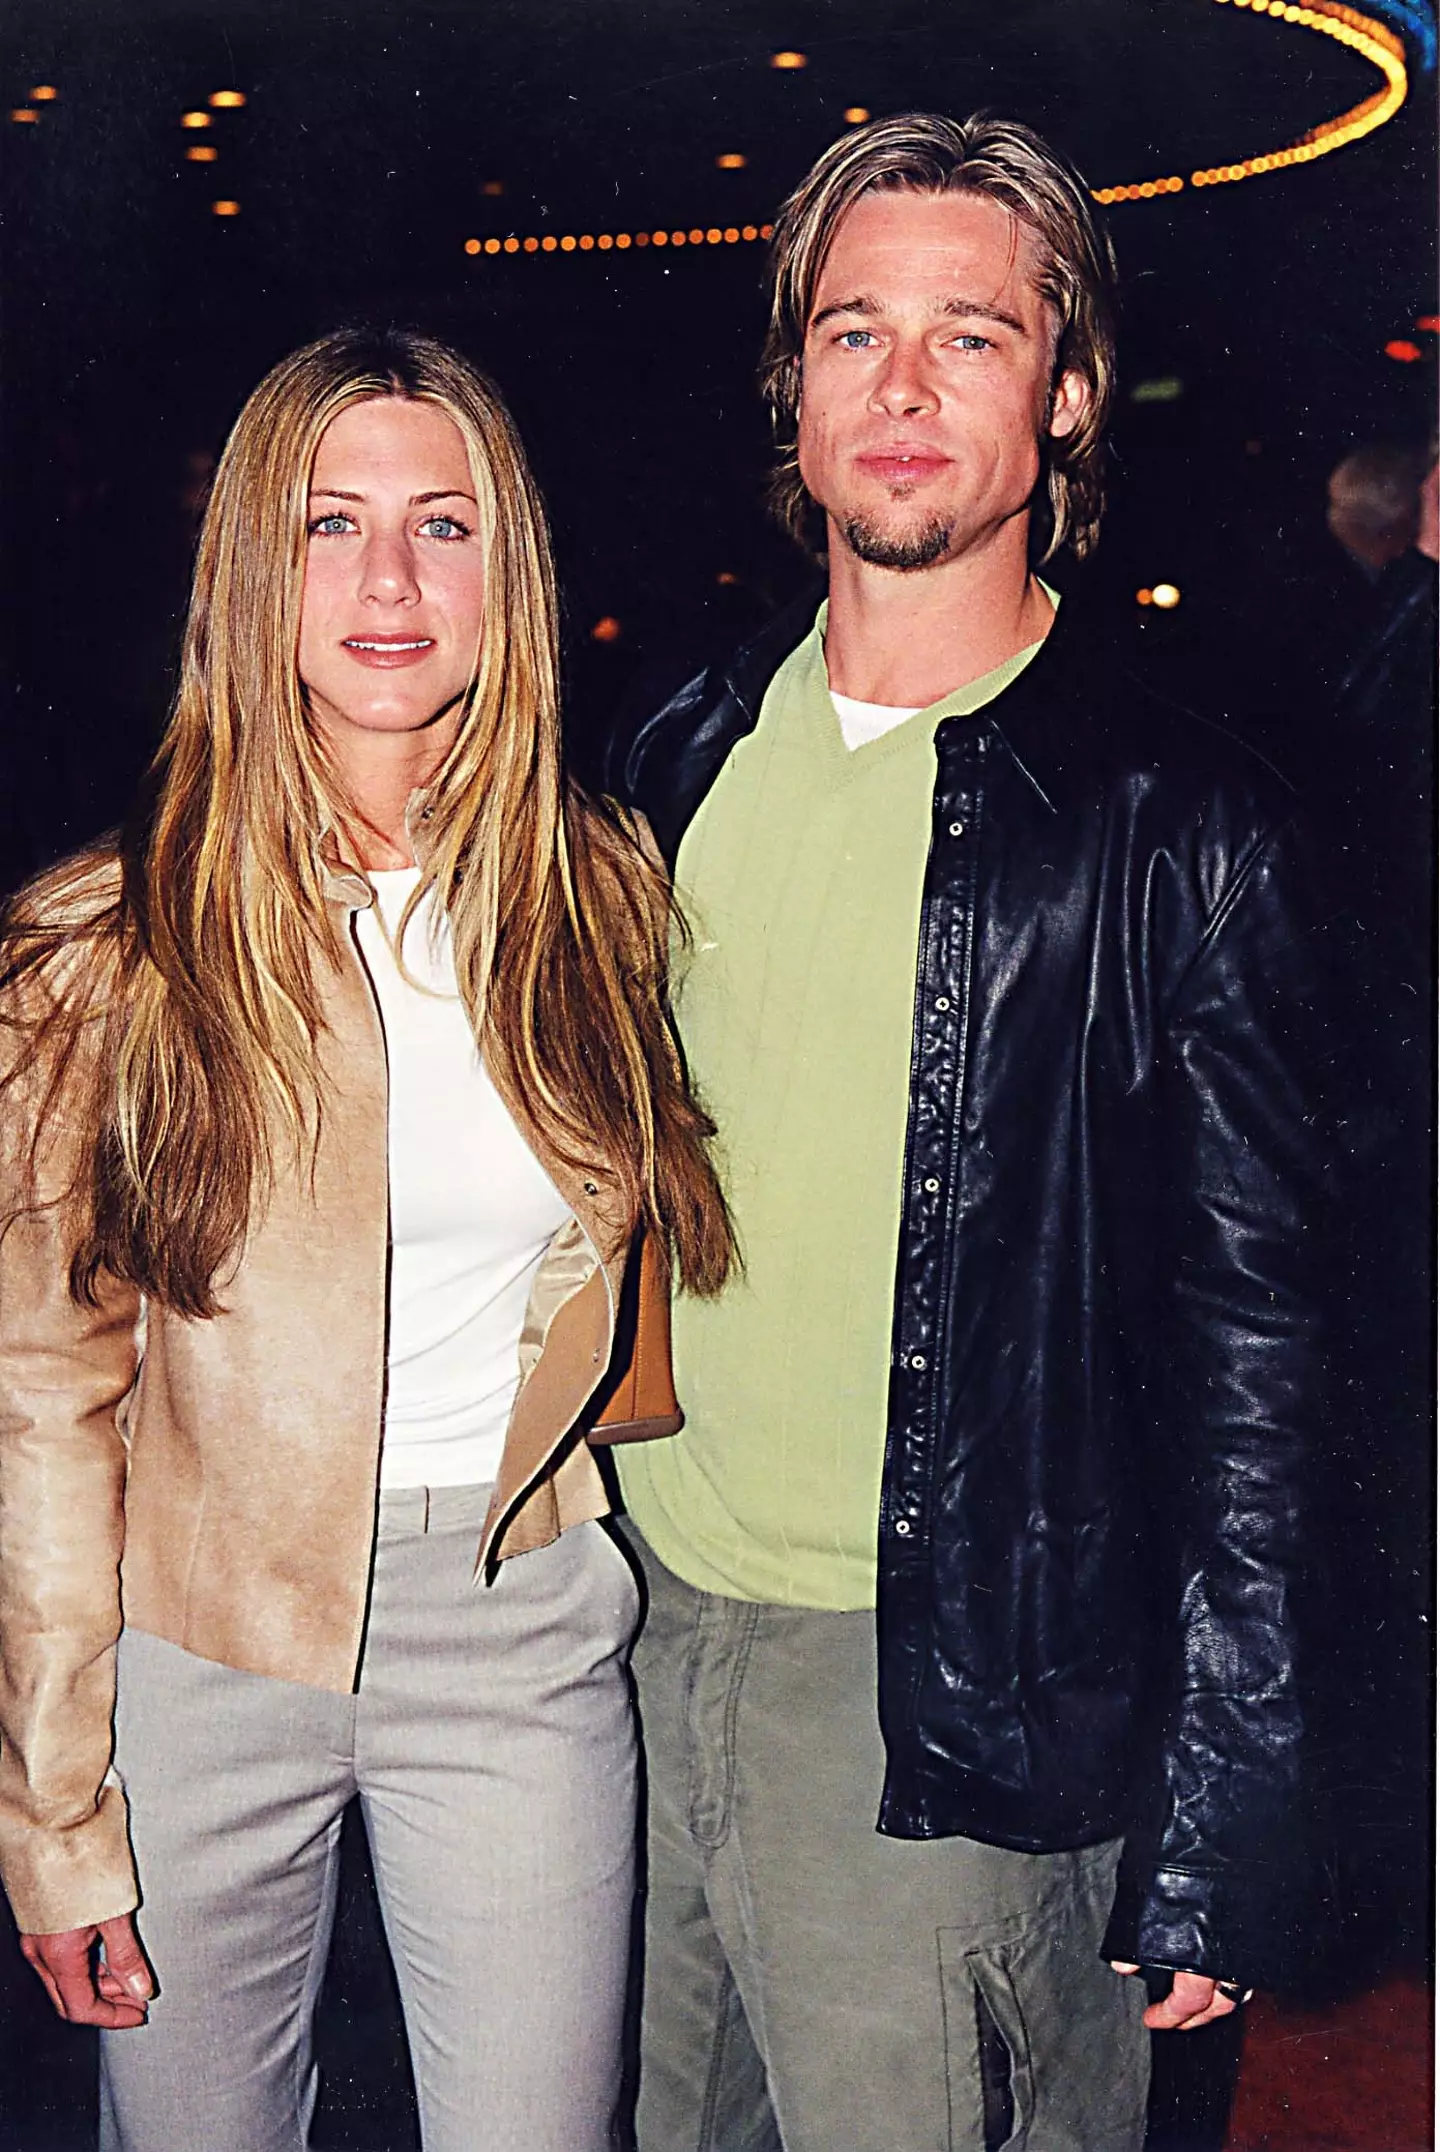 Aniston and Pitt were married for five years.